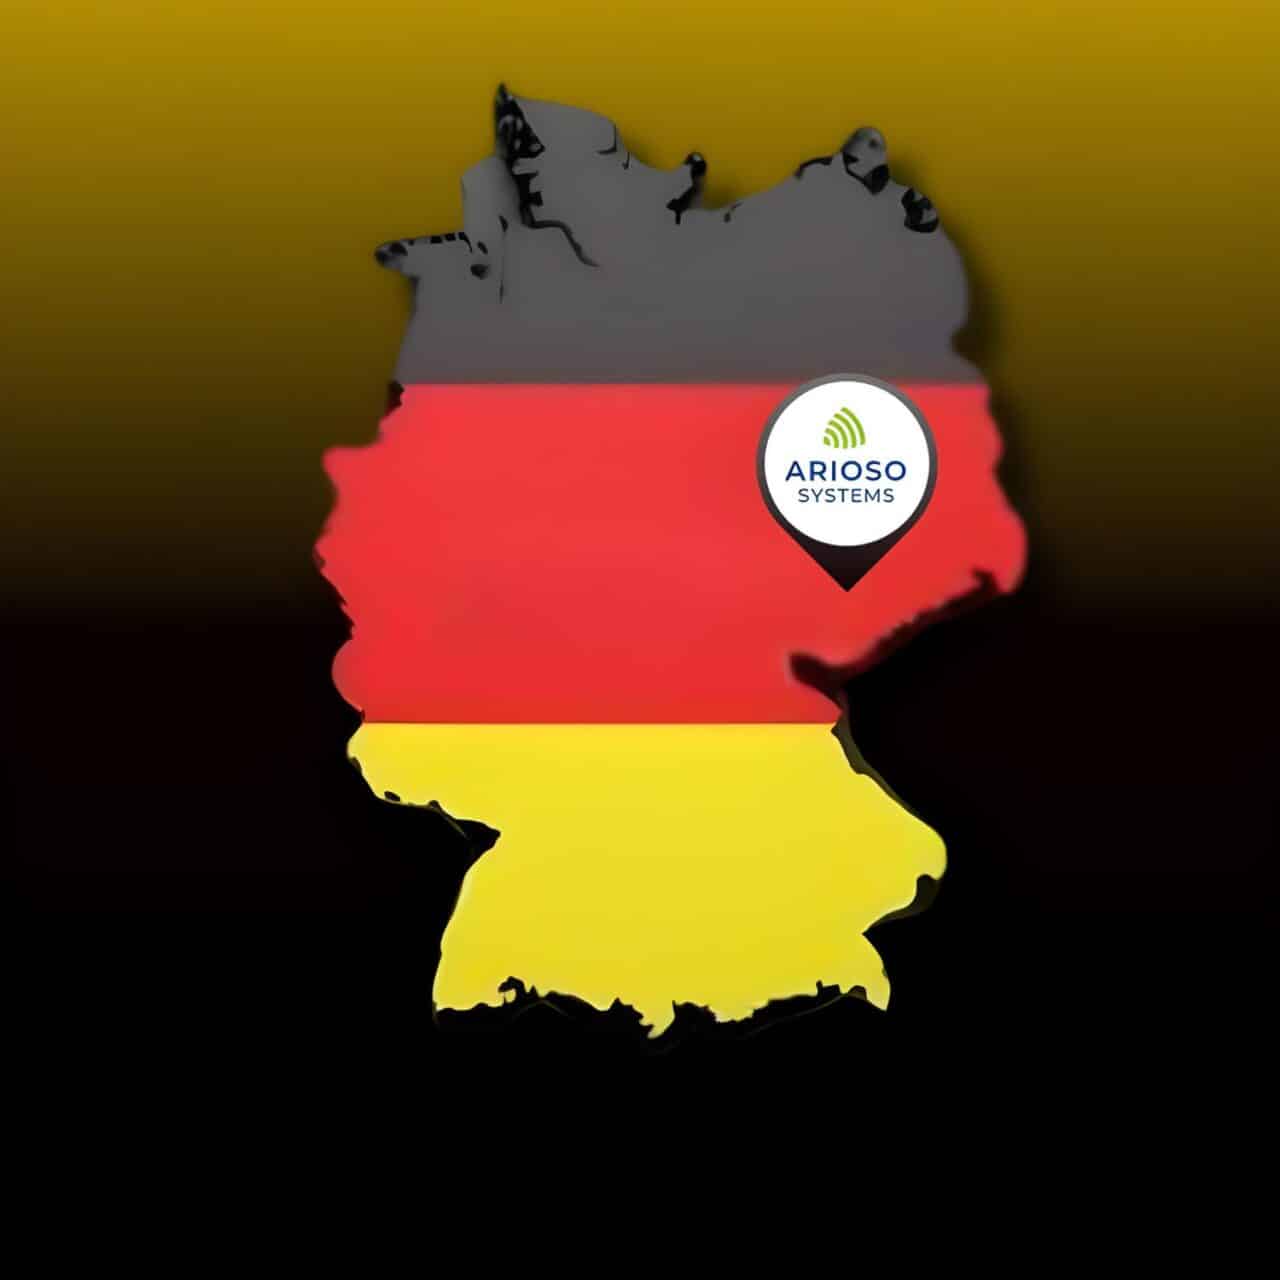 a map of Germany on a yellow & black background with Arioso logo presenting company's geo location